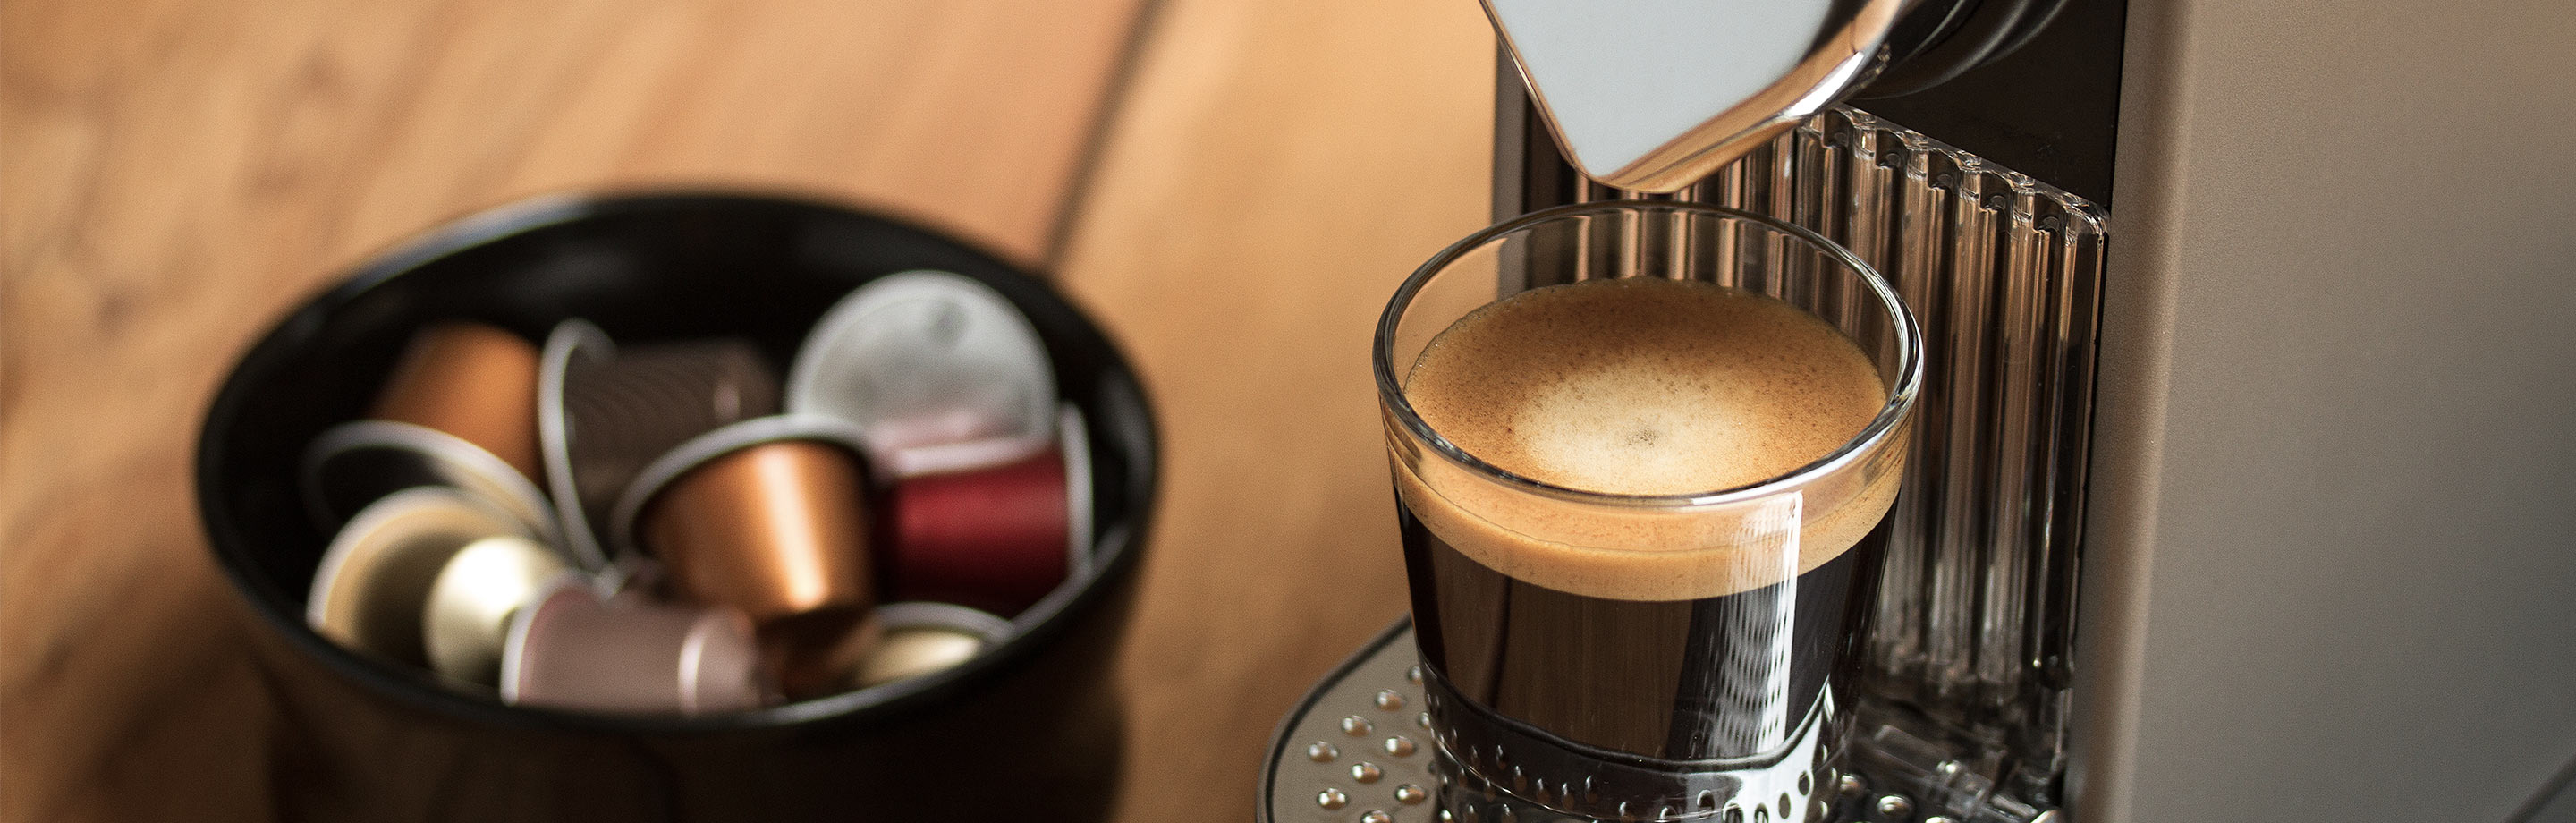 A Nespresso machine with a filled espresso glass. In the background are various coffee capsules.